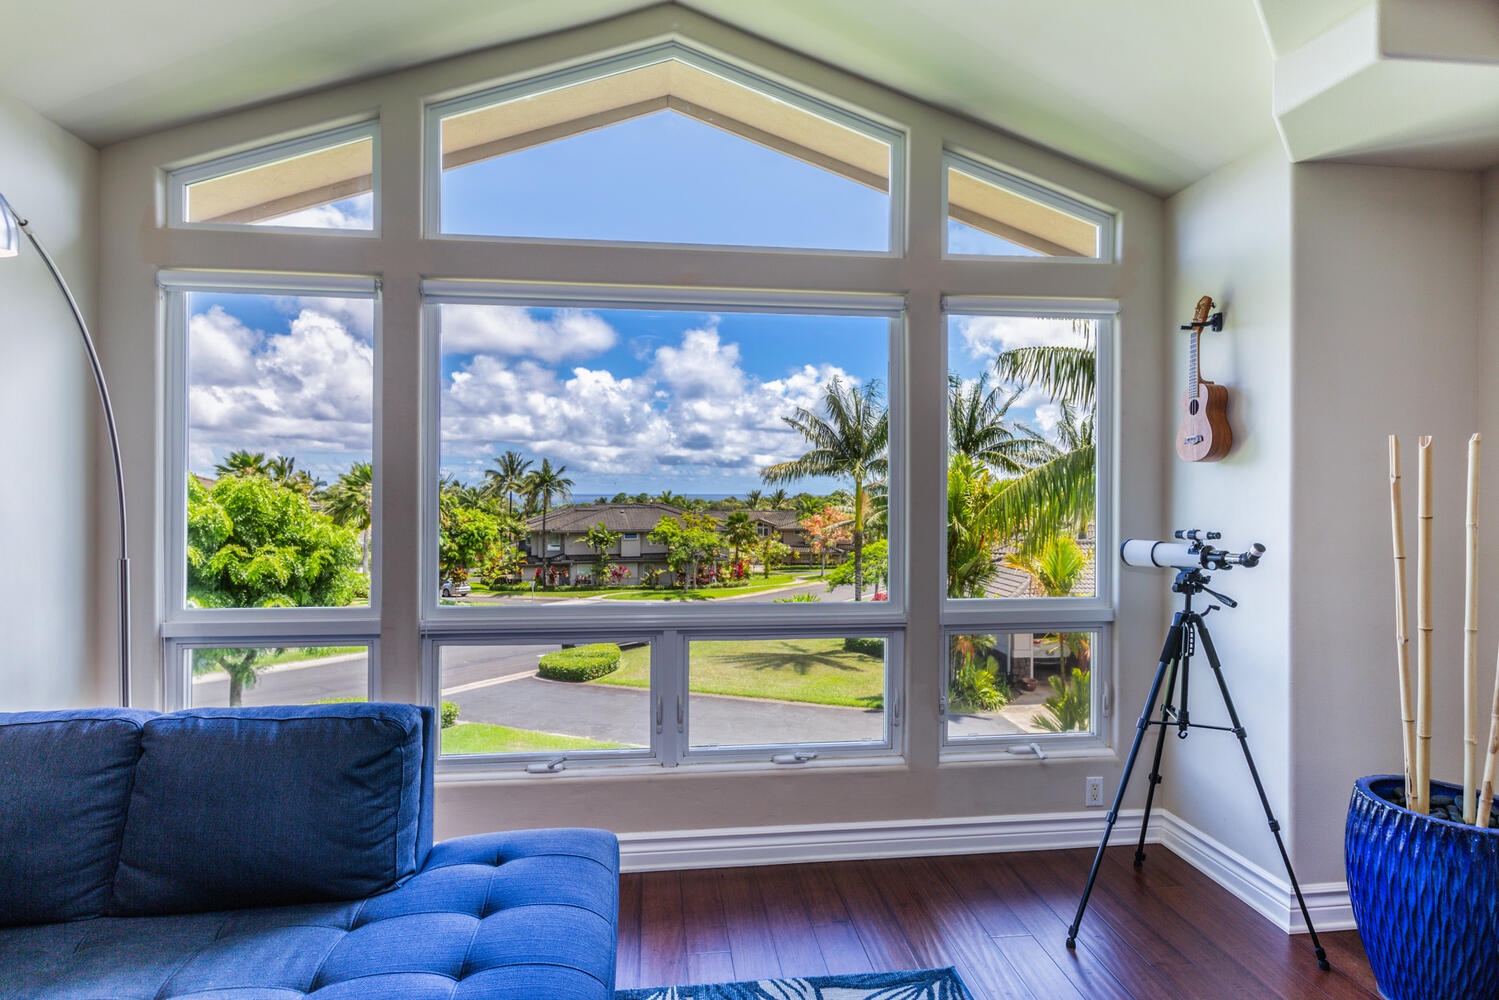 Princeville Vacation Rentals, Noelani Kai - Experience the sublime beauty of your surroundings from our living area, complete with a high-powered scope for up-close observations whether daytime or night time.